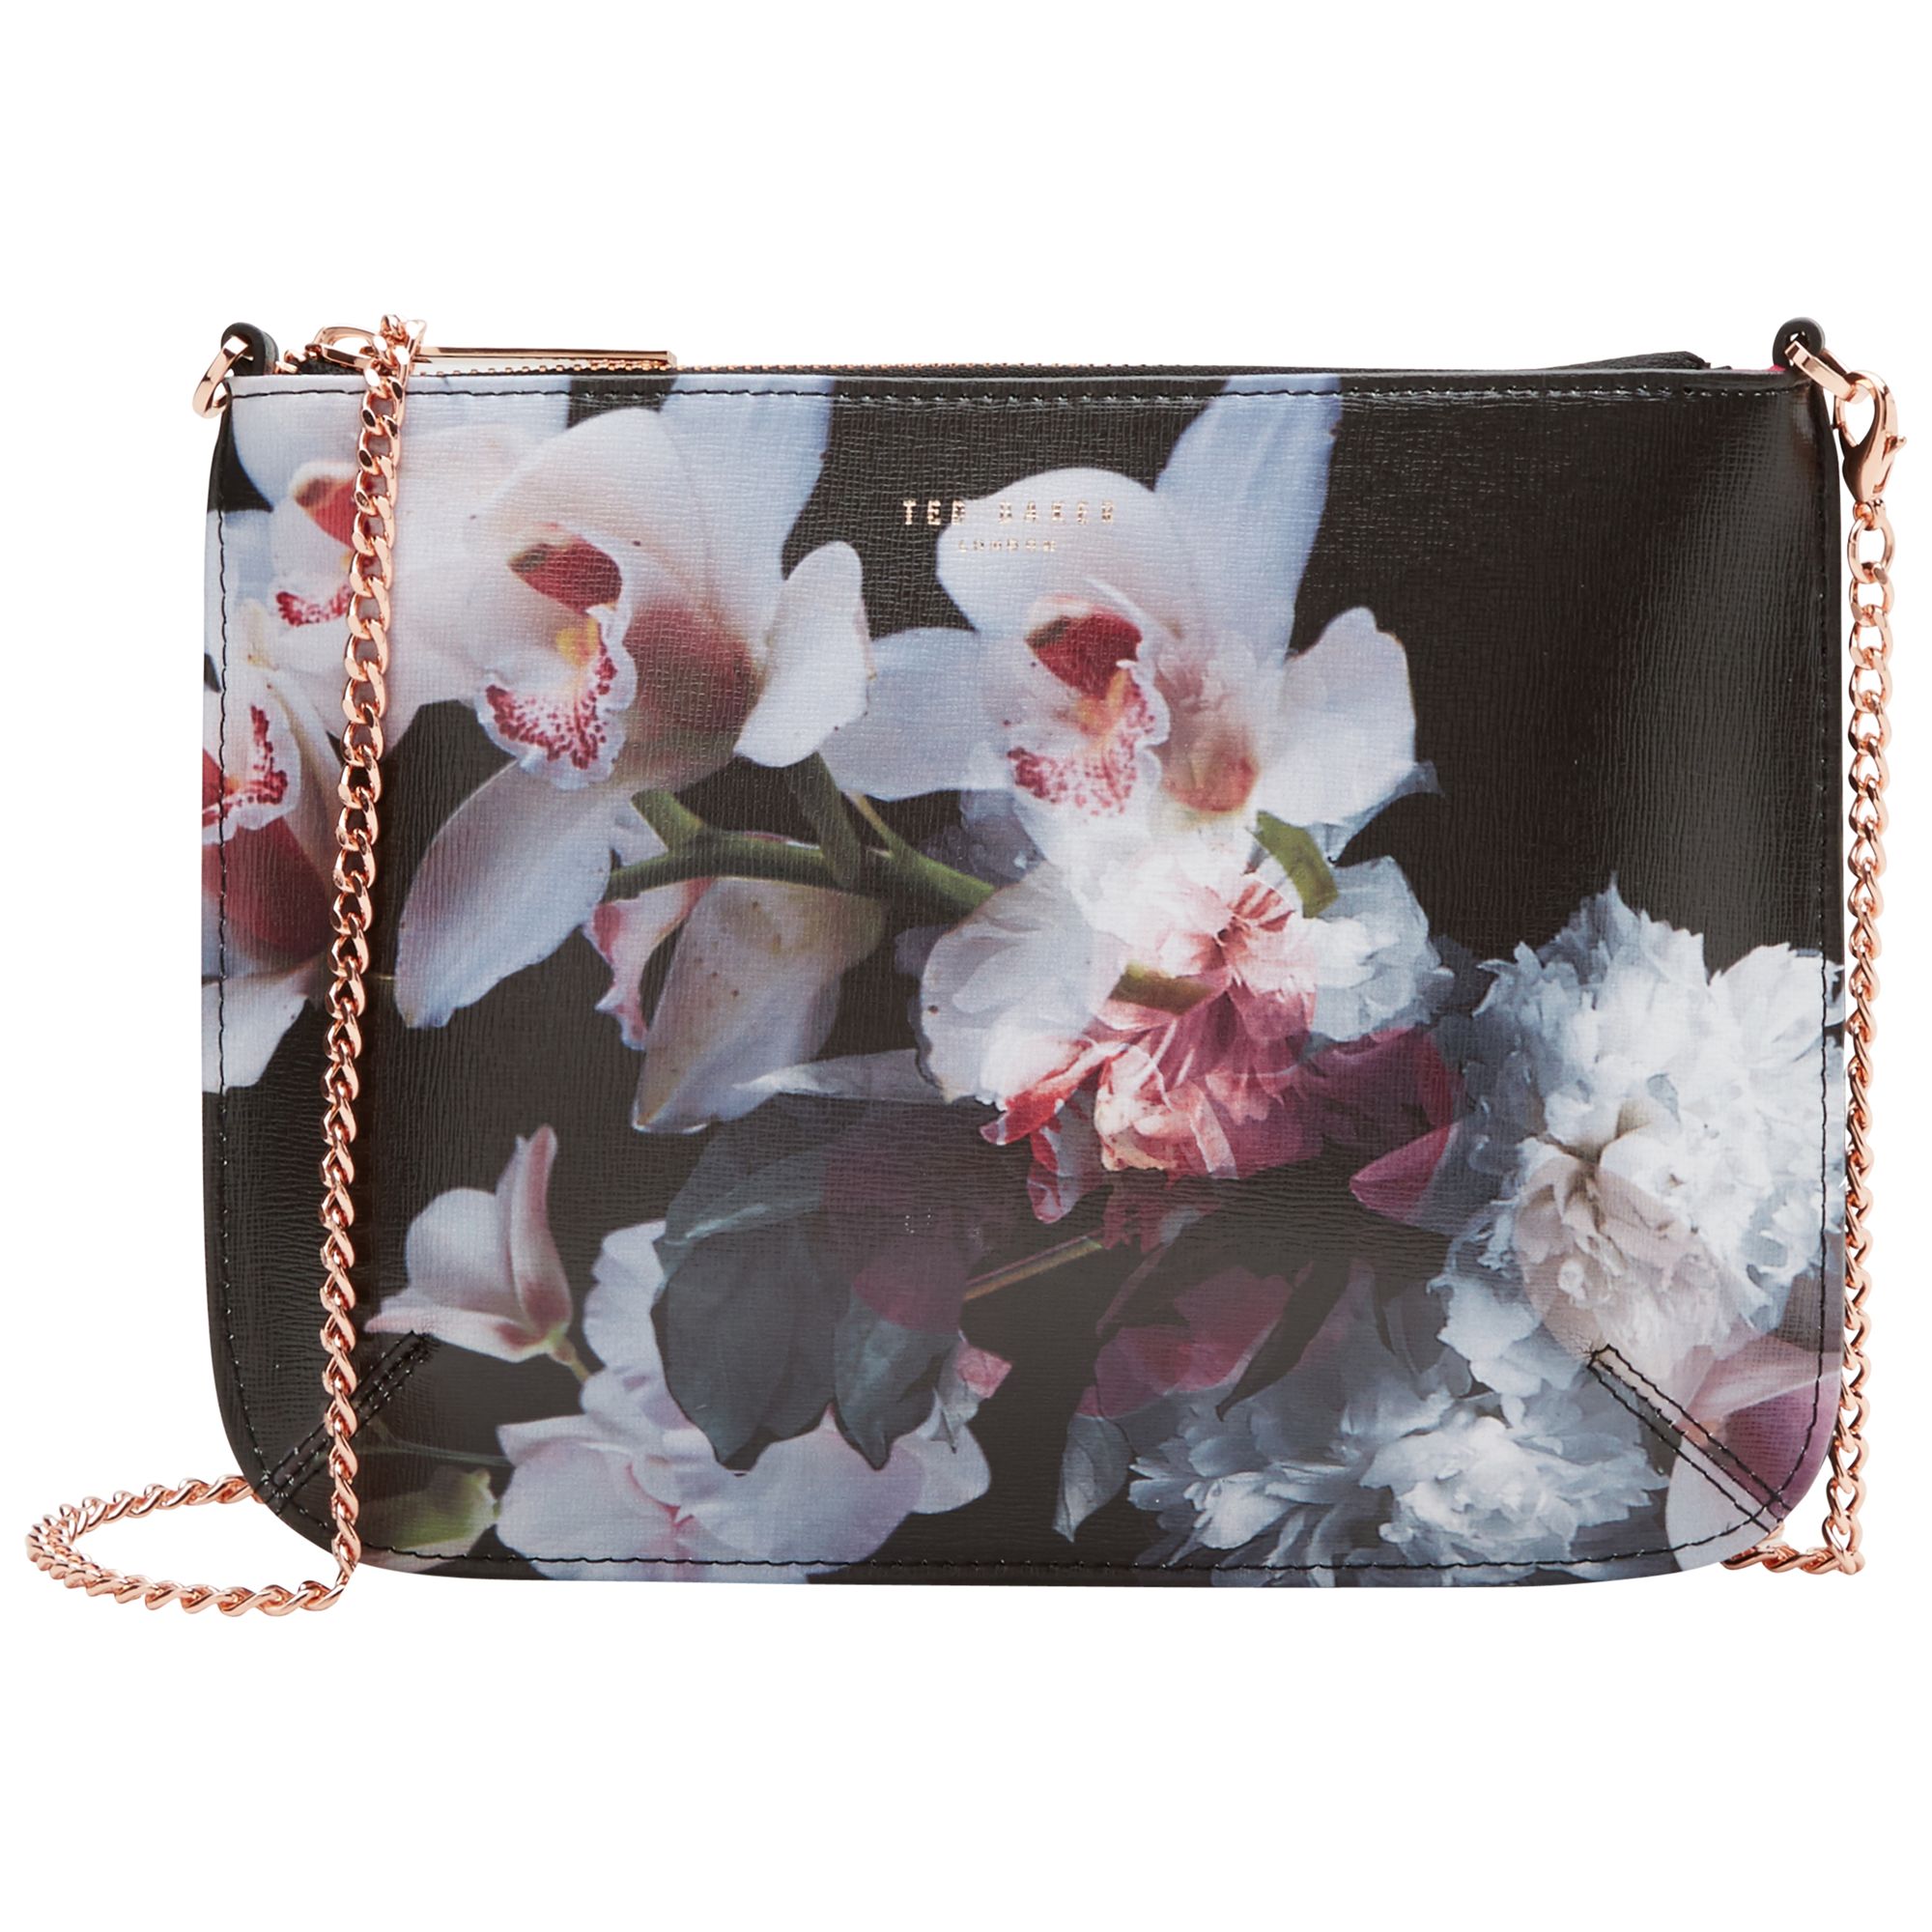 Ted Baker Cailey Ethereal Posie Across Body Bag